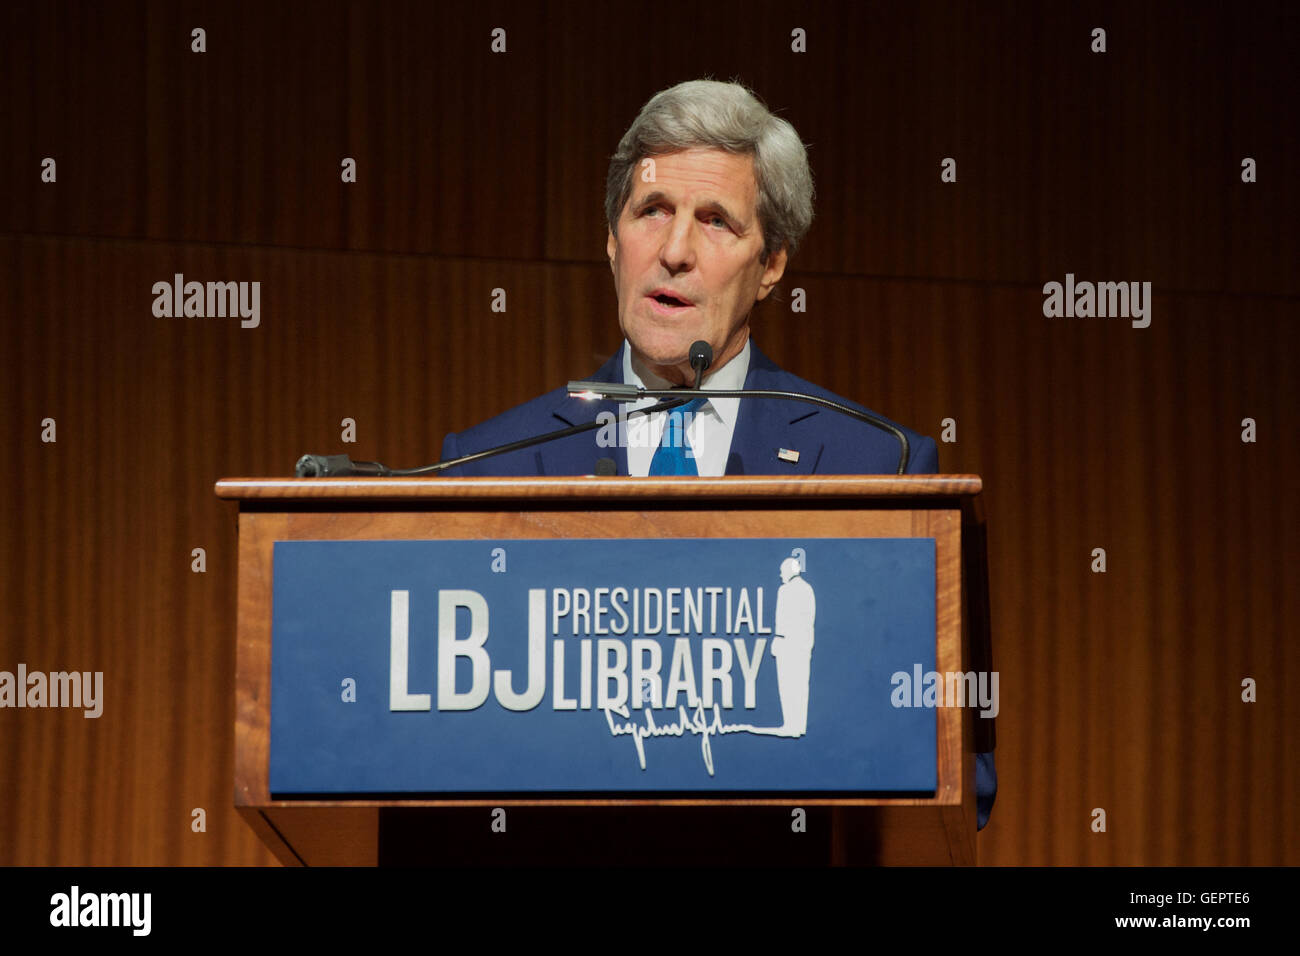 Secretary Kerry Delivers a Speech About the Past and Future of the U.S.-Vietnam Relationship at the Vietnam War Summit at the LBJ Presidential Library in Austin Stock Photo